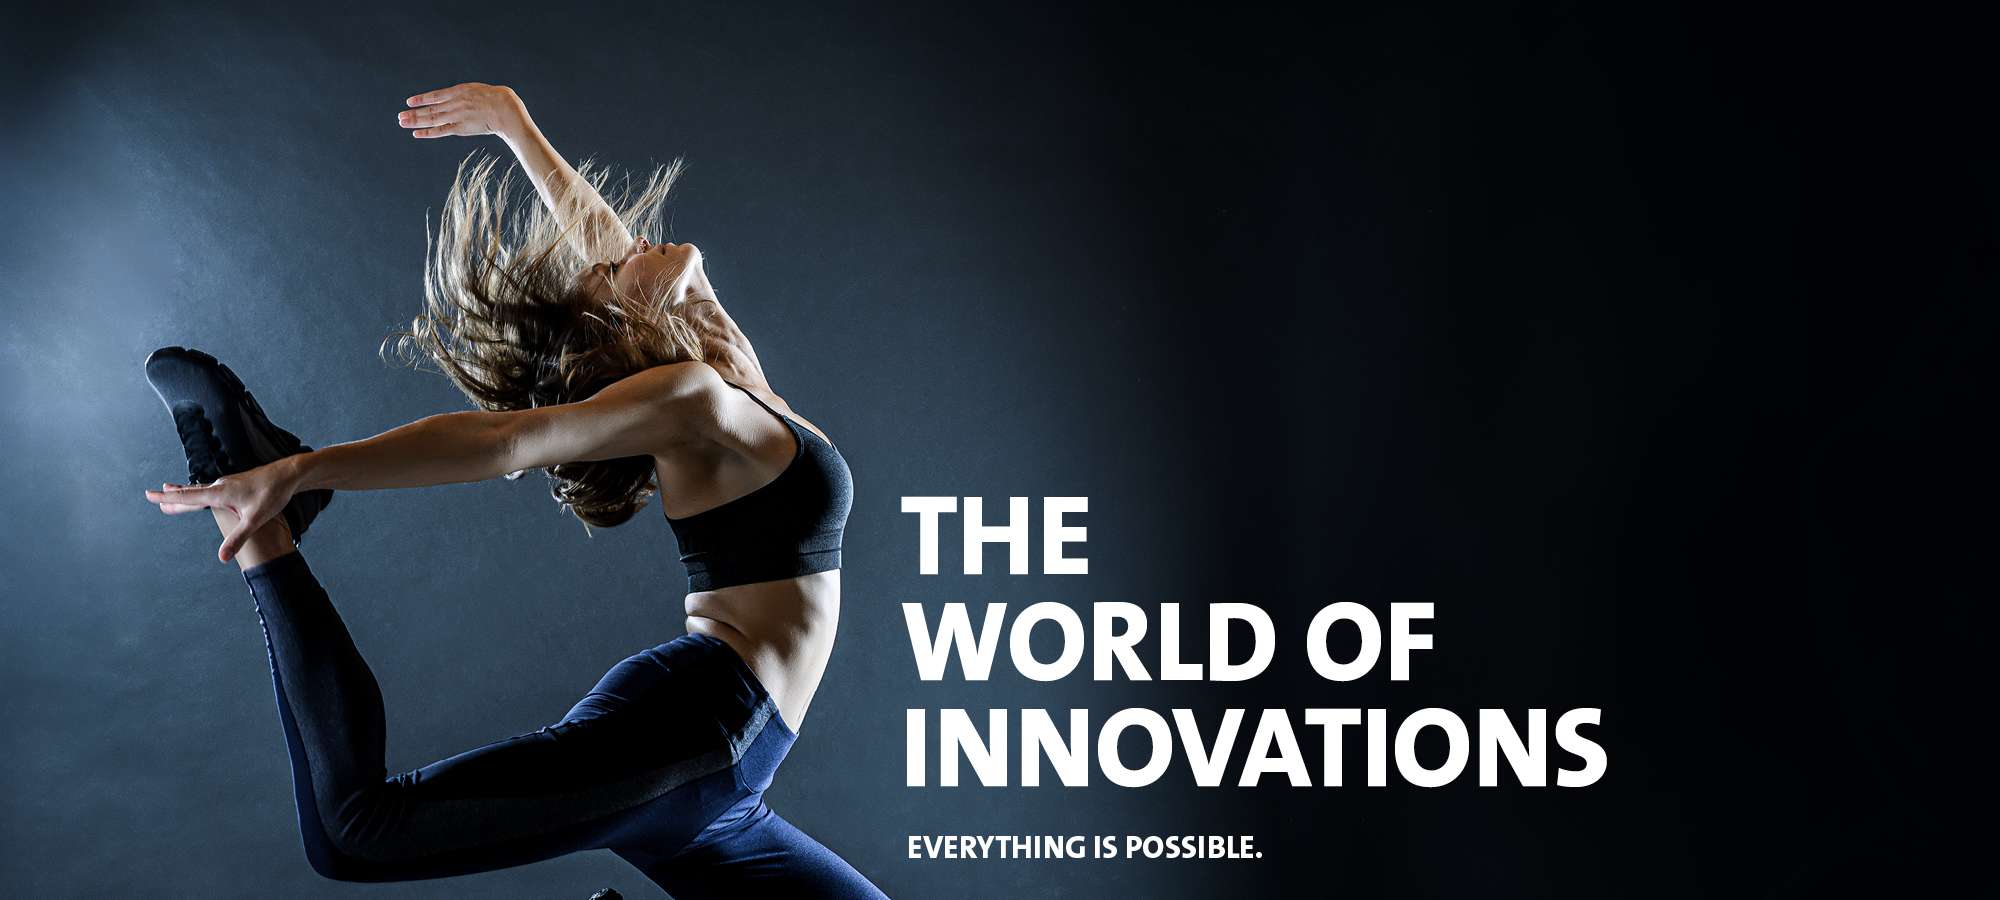 The world of innovations